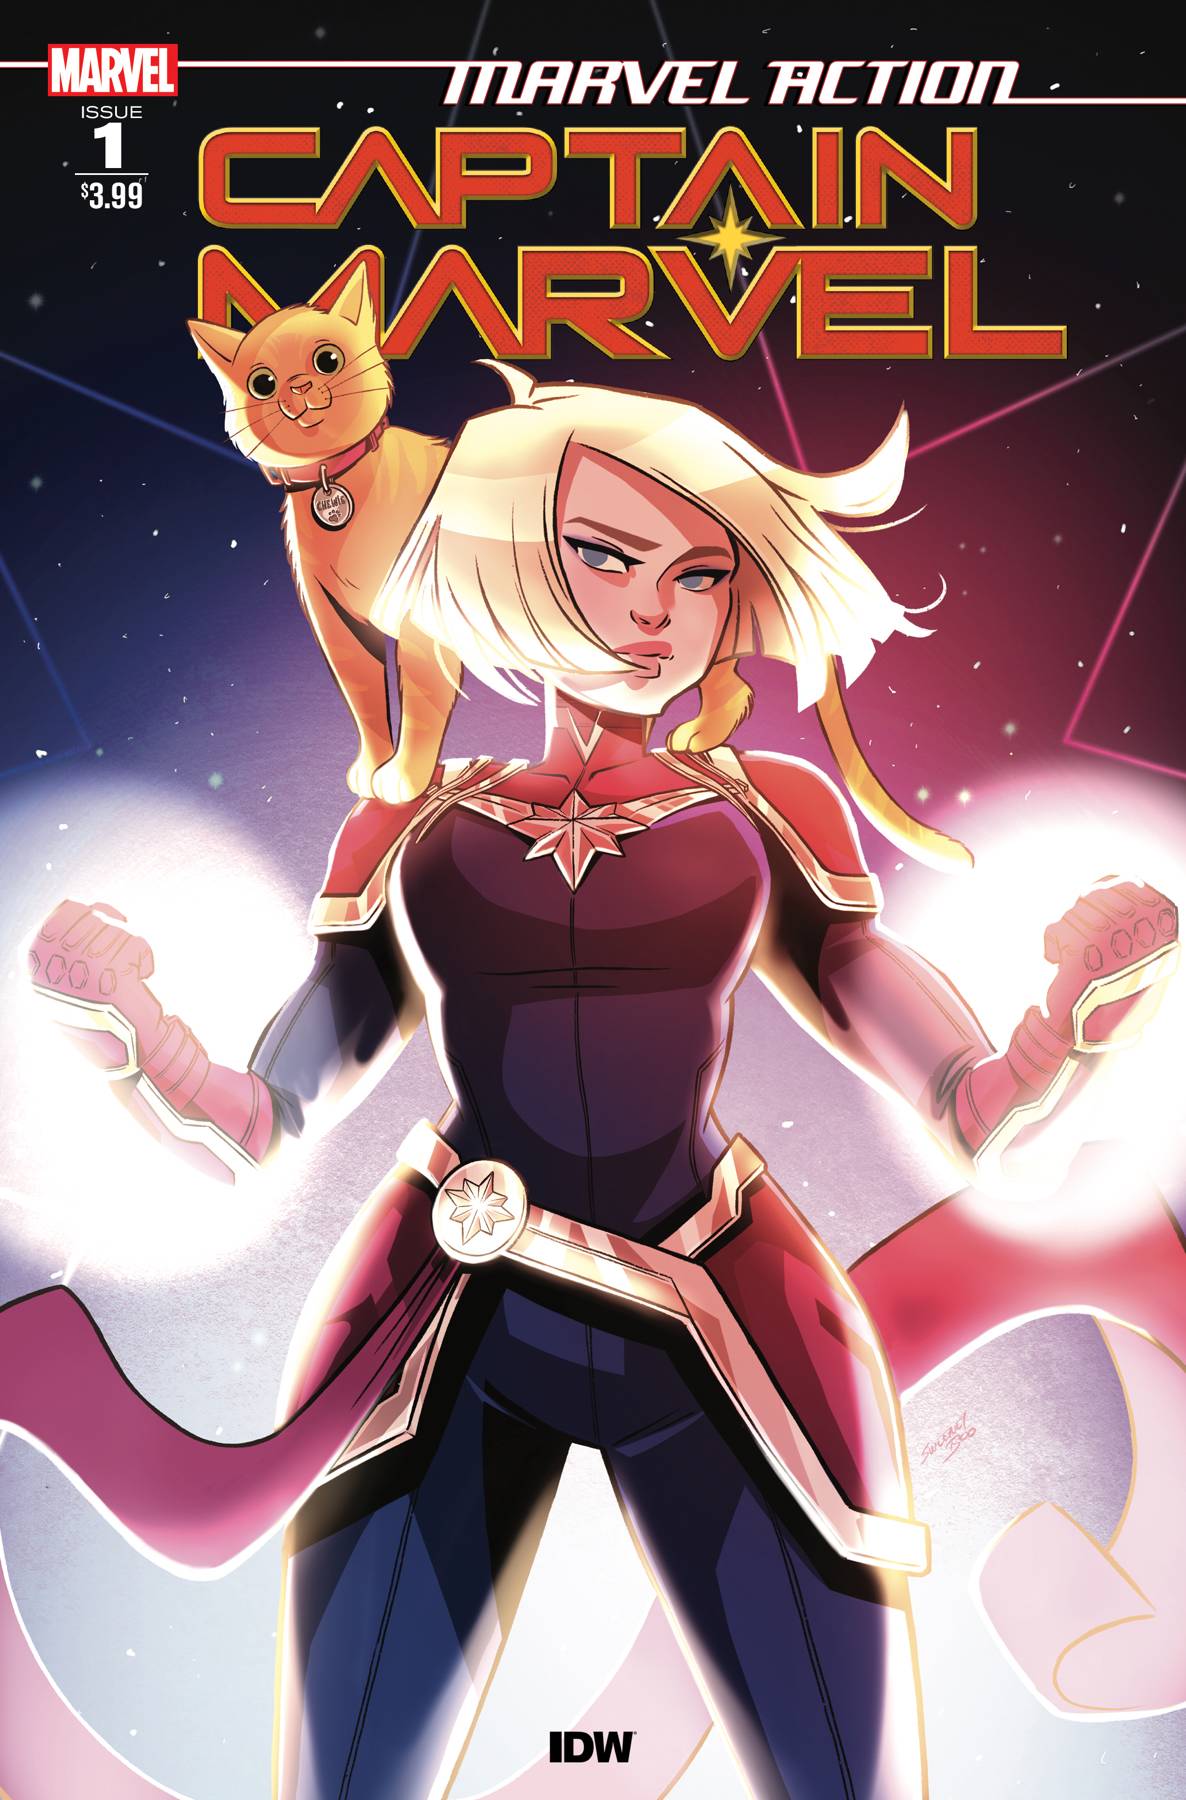 Marvel Action Captain Marvel #1 Cover A Boo (Of 3)